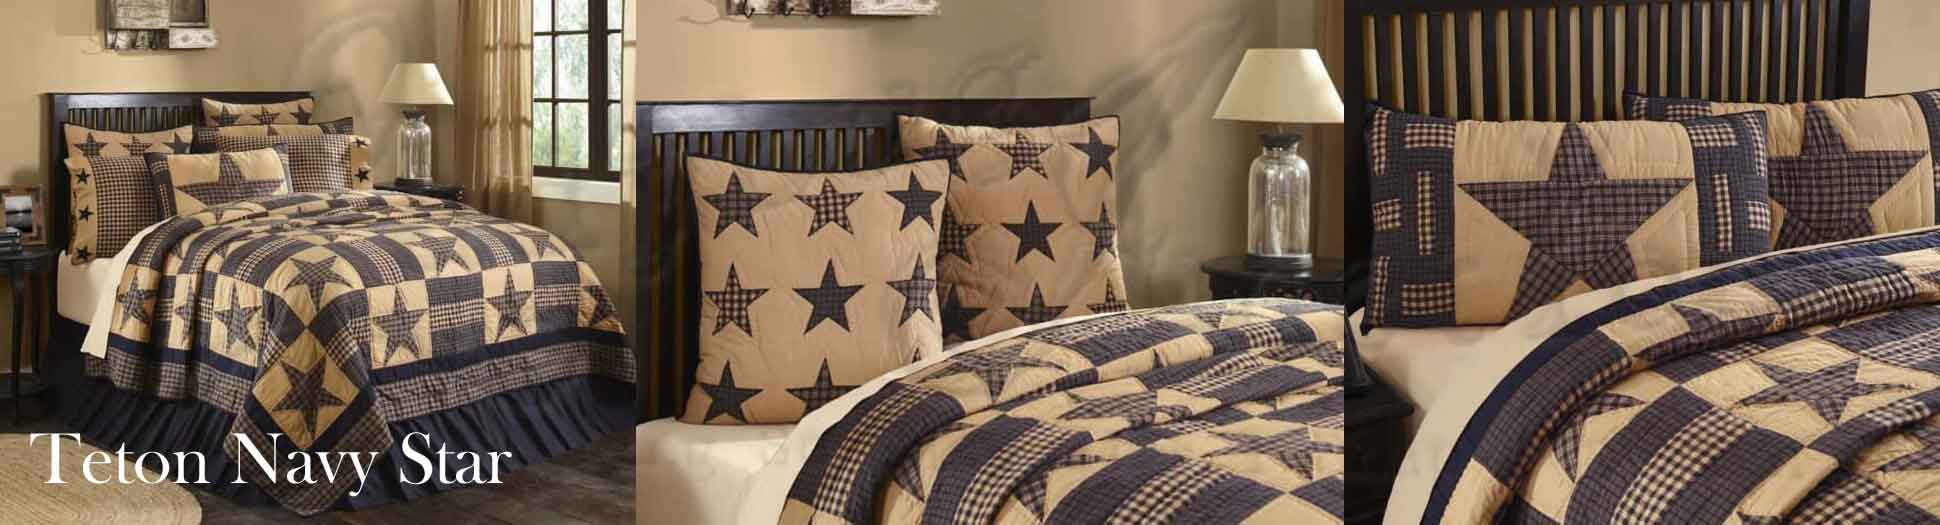 Shop Teton Navy Star Quilts and Bedding Accessories